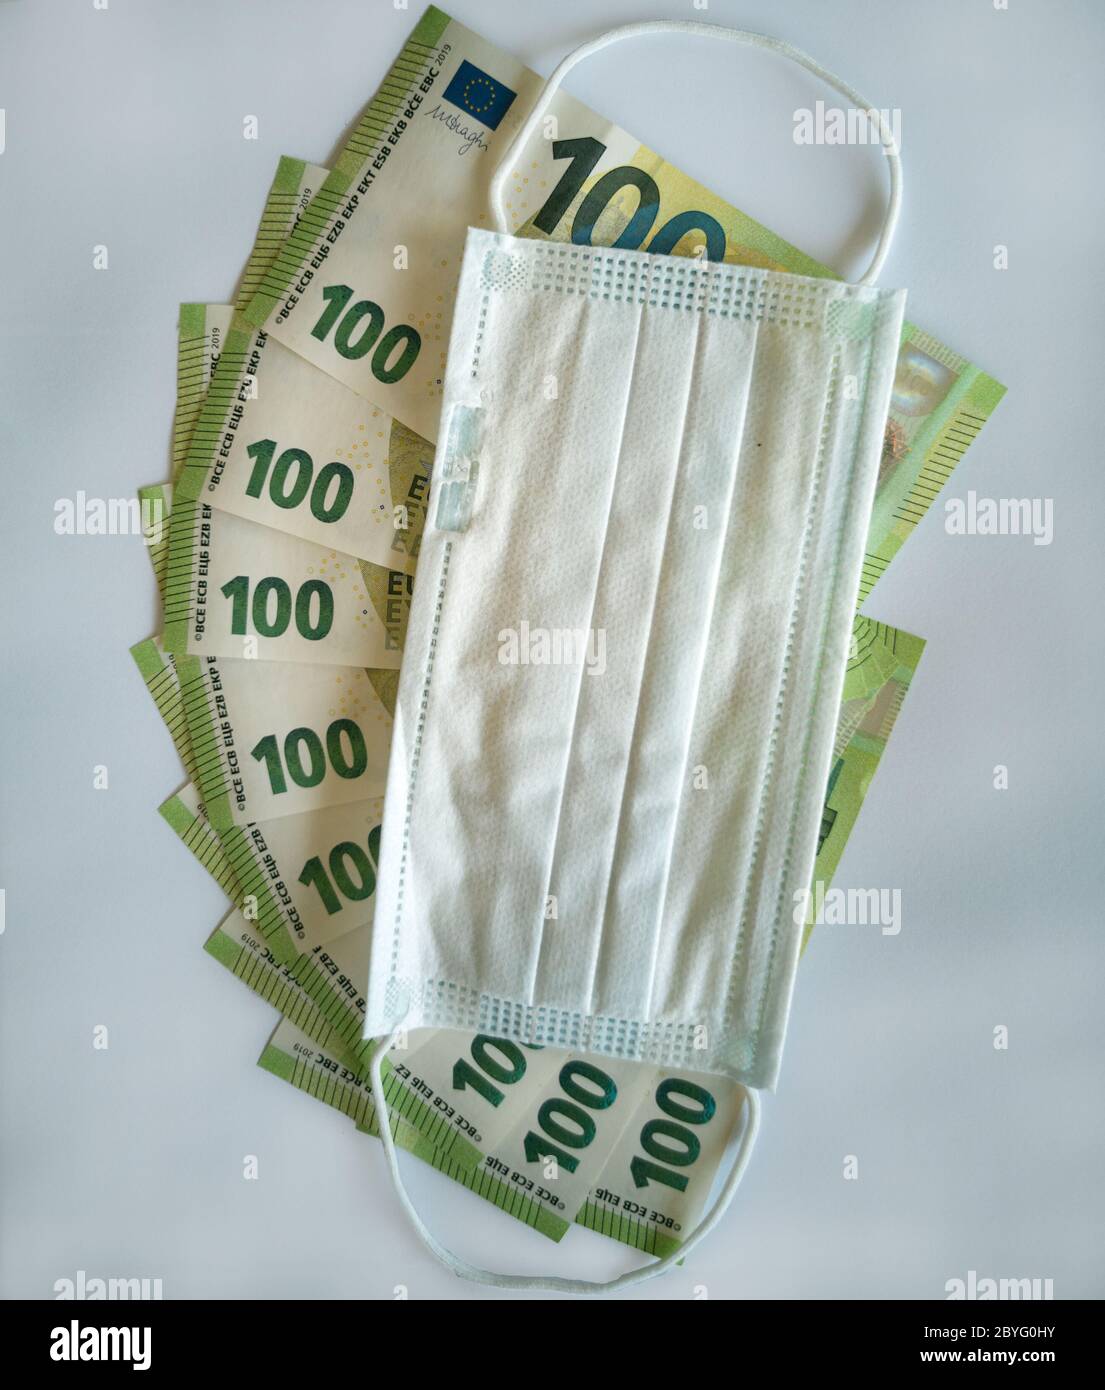 Take a bounty for the worser time. You should save your money. Stock Photo